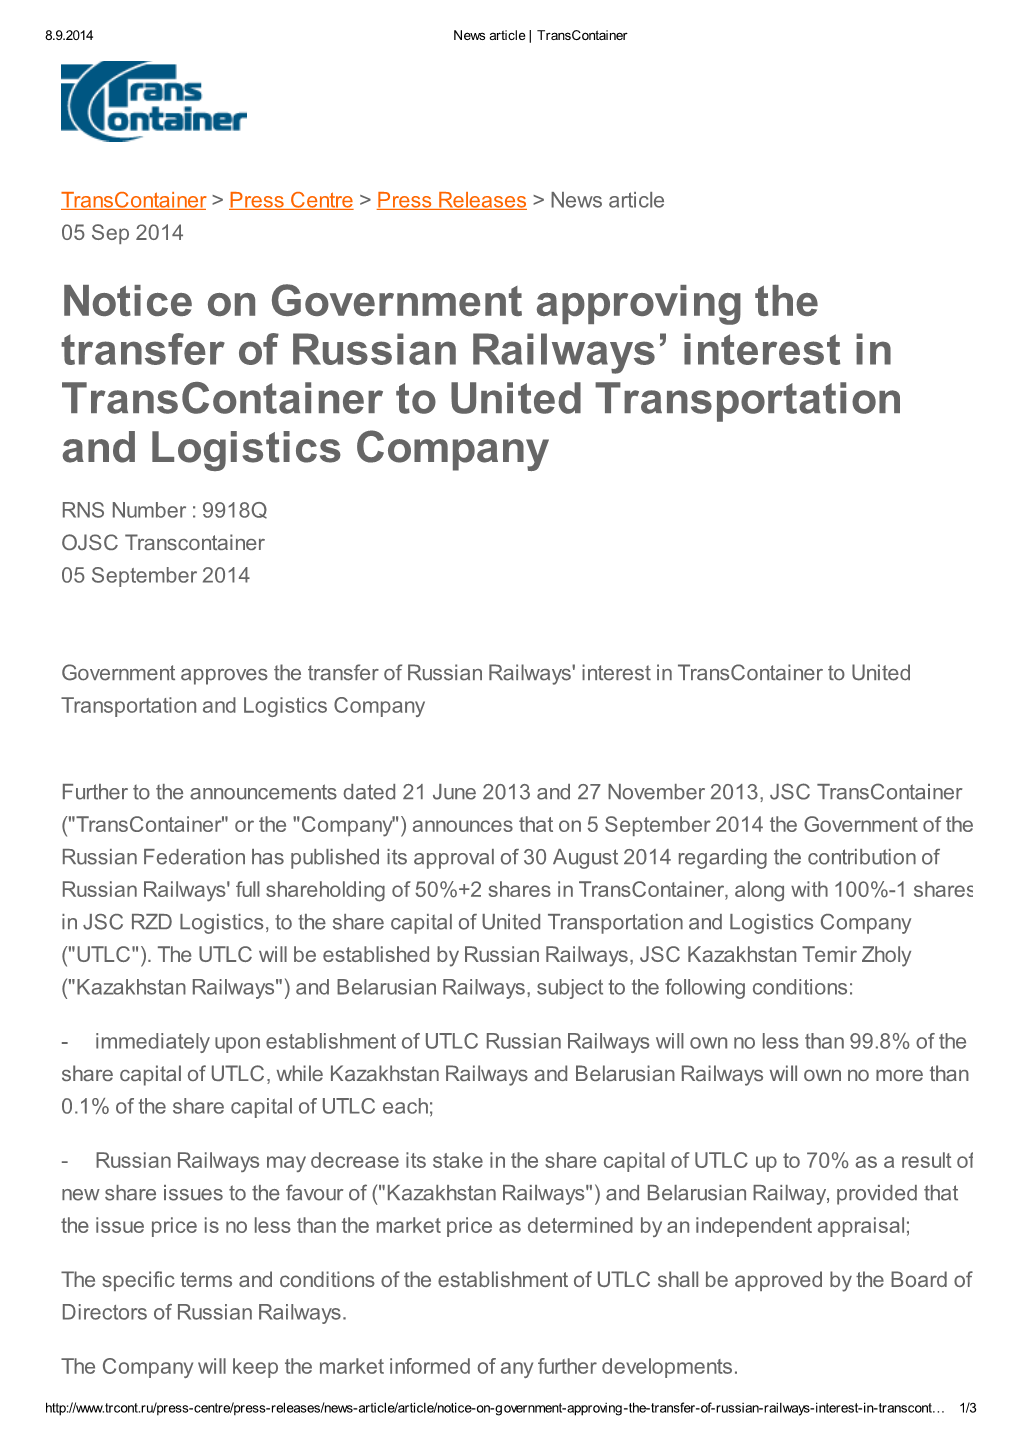 Notice on Government Approving the Transfer of Russian Railways’ Interest in Transcontainer to United Transportation and Logistics Company